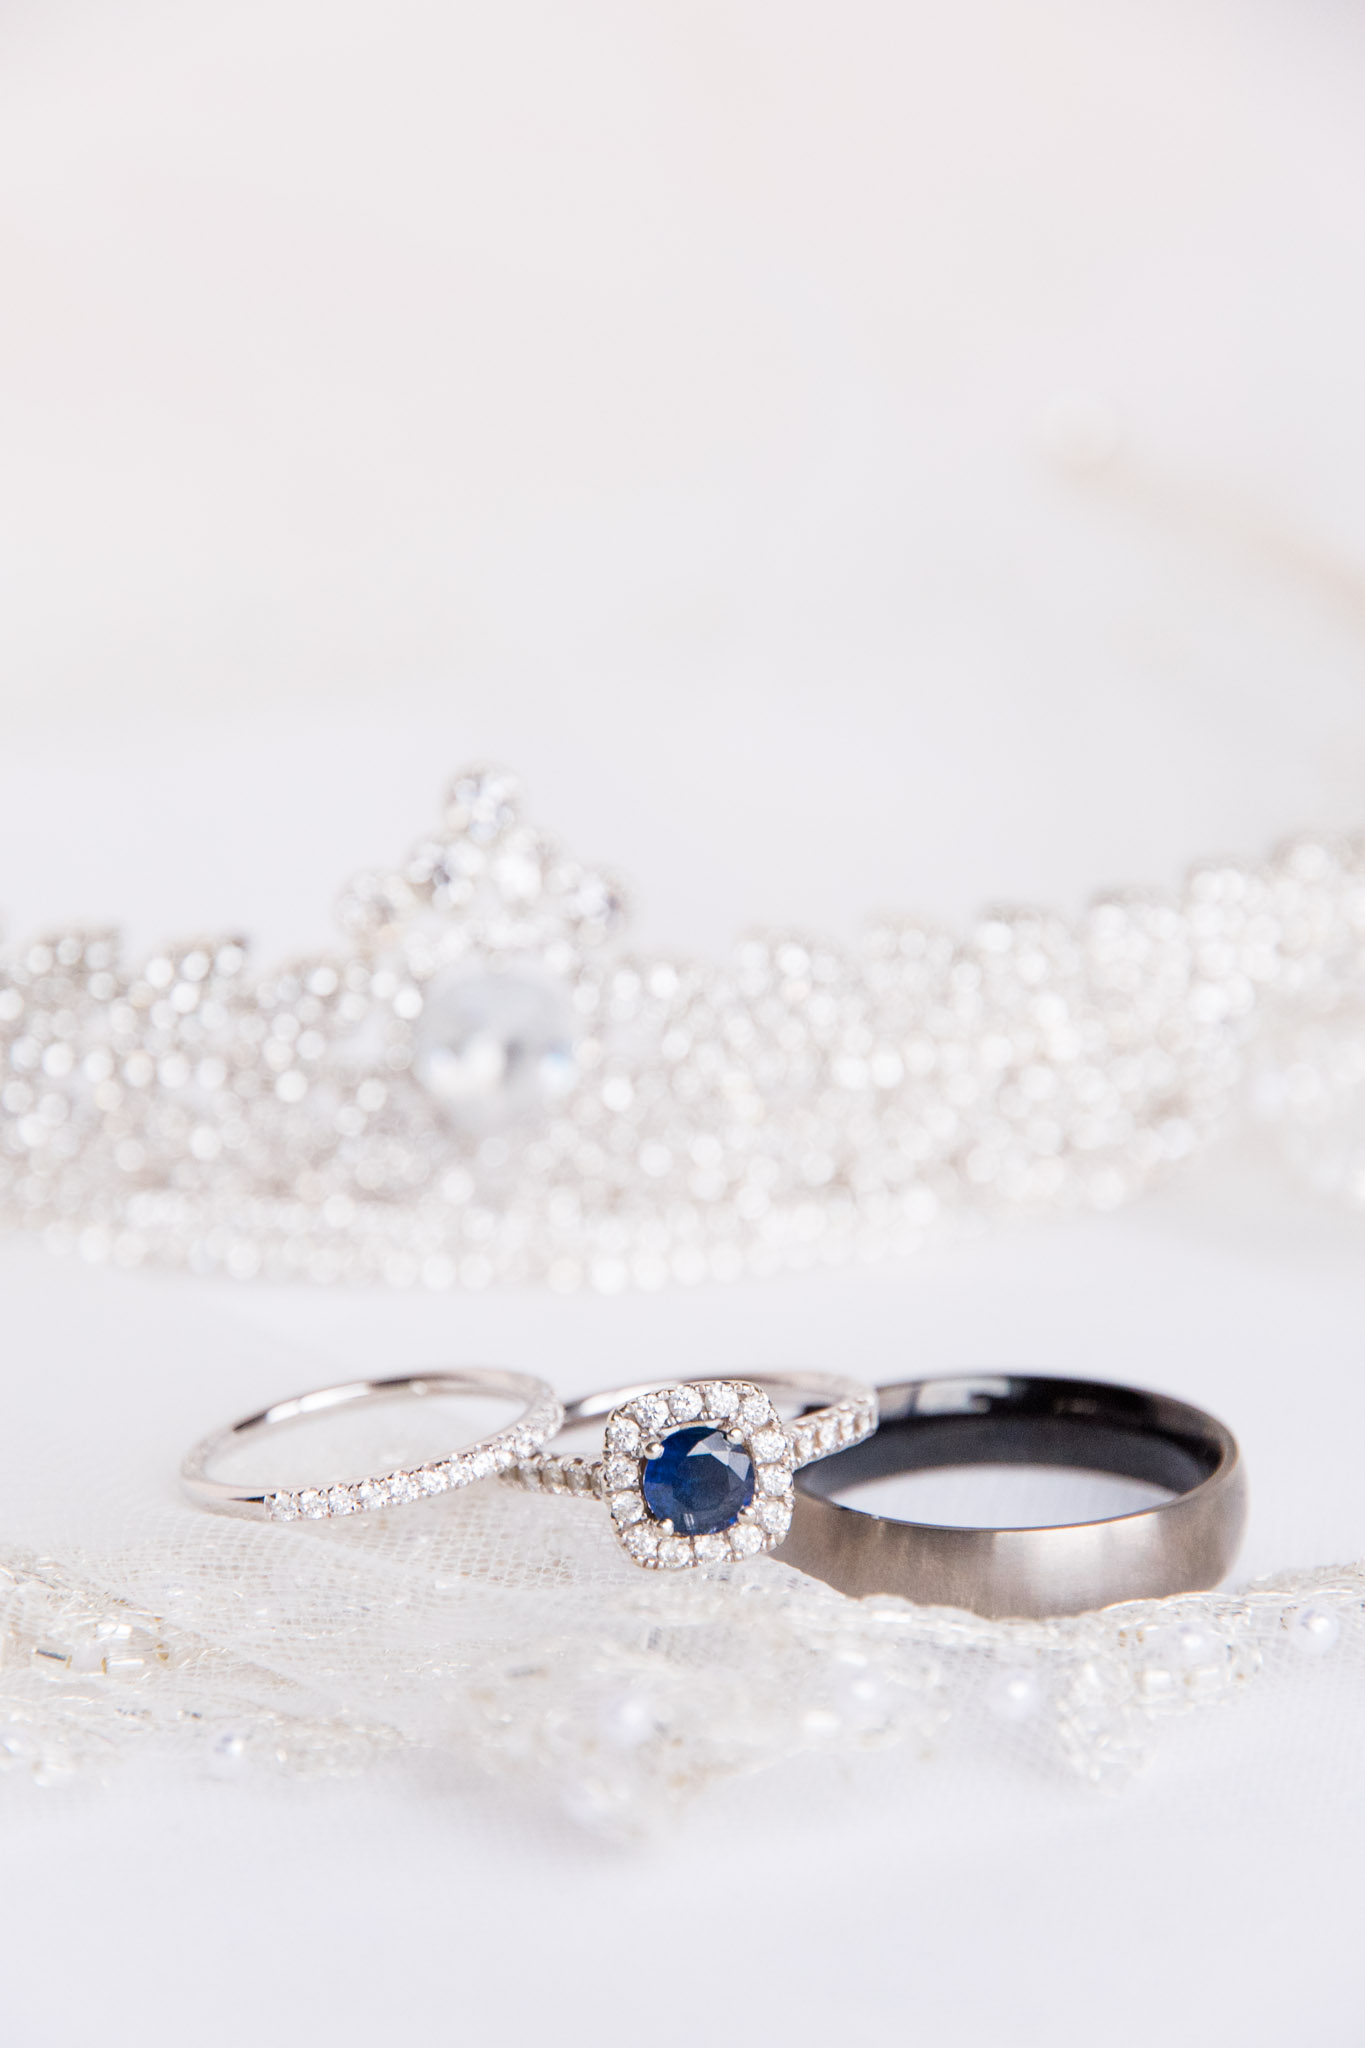 Sapphire Engagement Ring and Wedding Bands Displayed